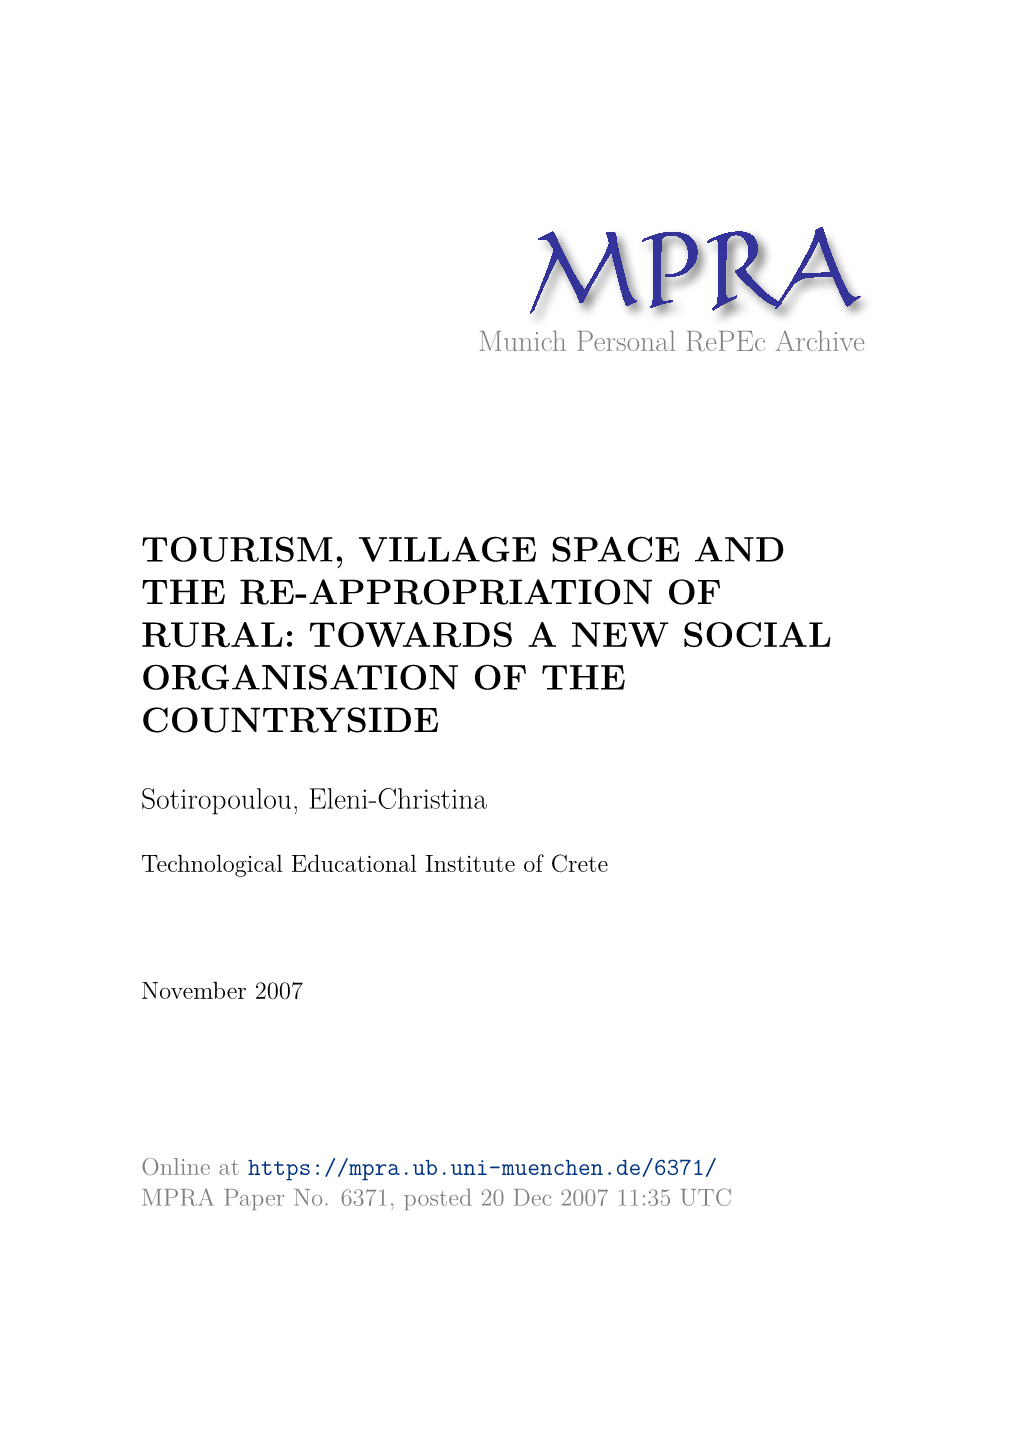 Tourism, Village Space and the Re-Appropriation of Rural: Towards a New Social Organisation of the Countryside